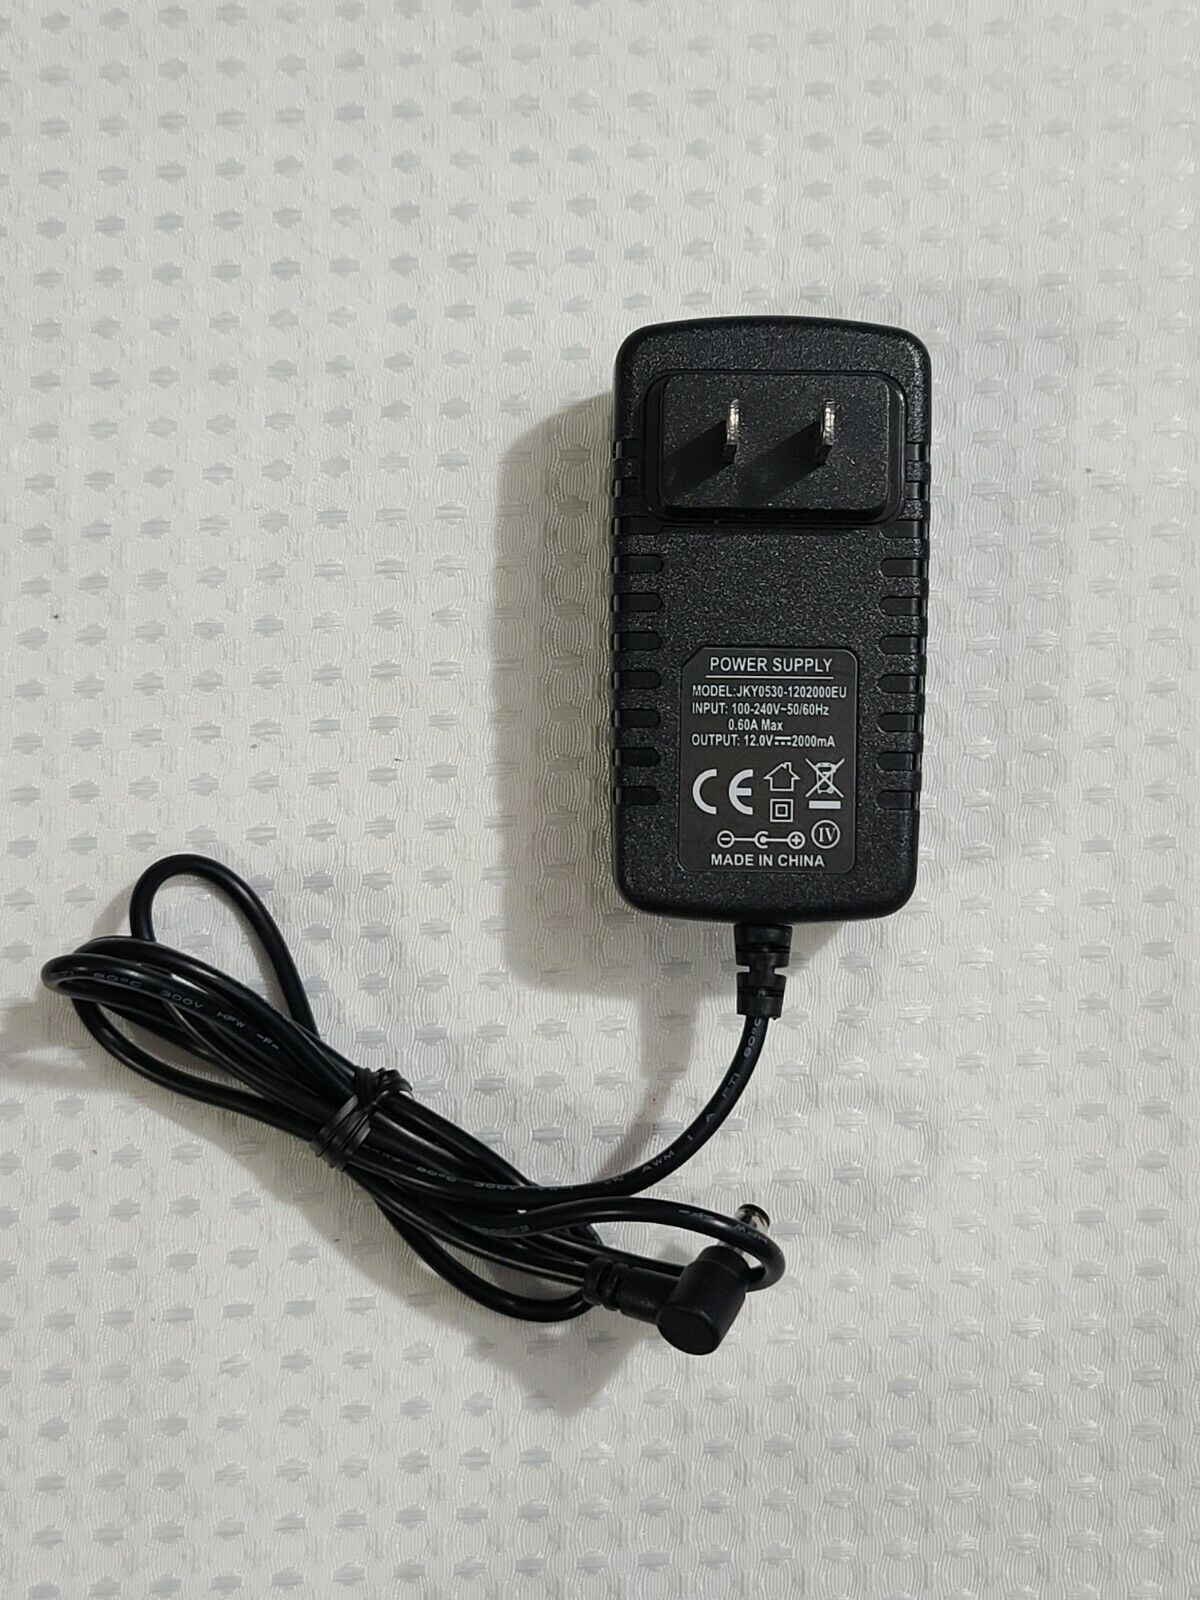 JKY0530-1202000EU - Power Supply Adapter - 12V 2.0A 2000mA - NEW Compatible Brand: For Unbranded/Generic Type: Power - Click Image to Close